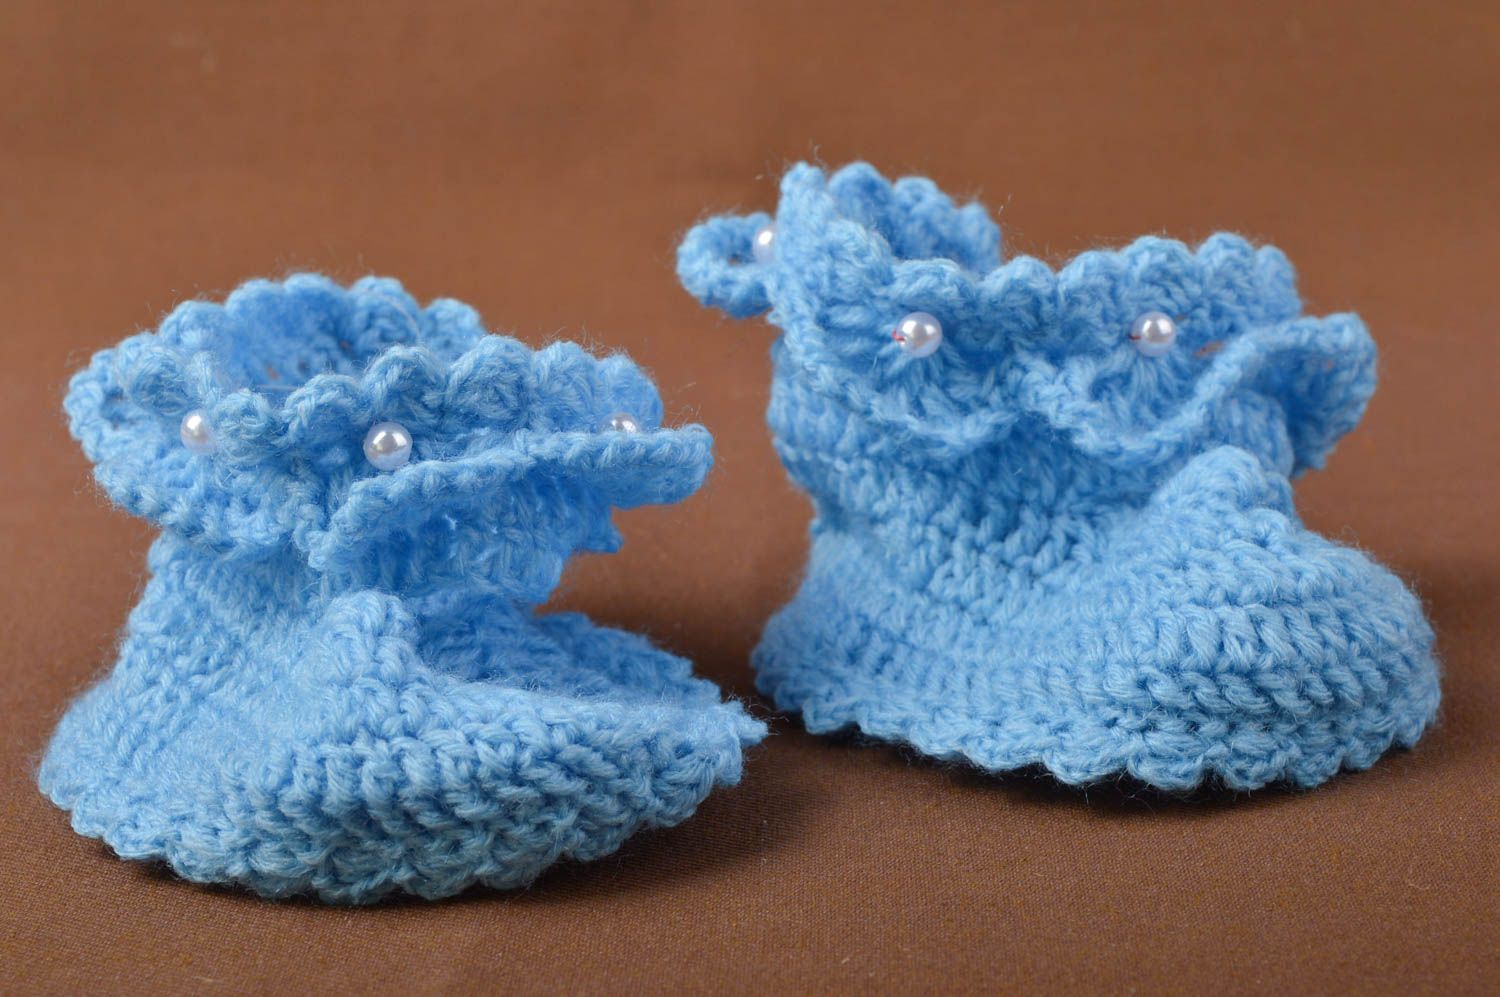 Crocheted booties for babies knitted socks crochet booties for baby unusual gift photo 1